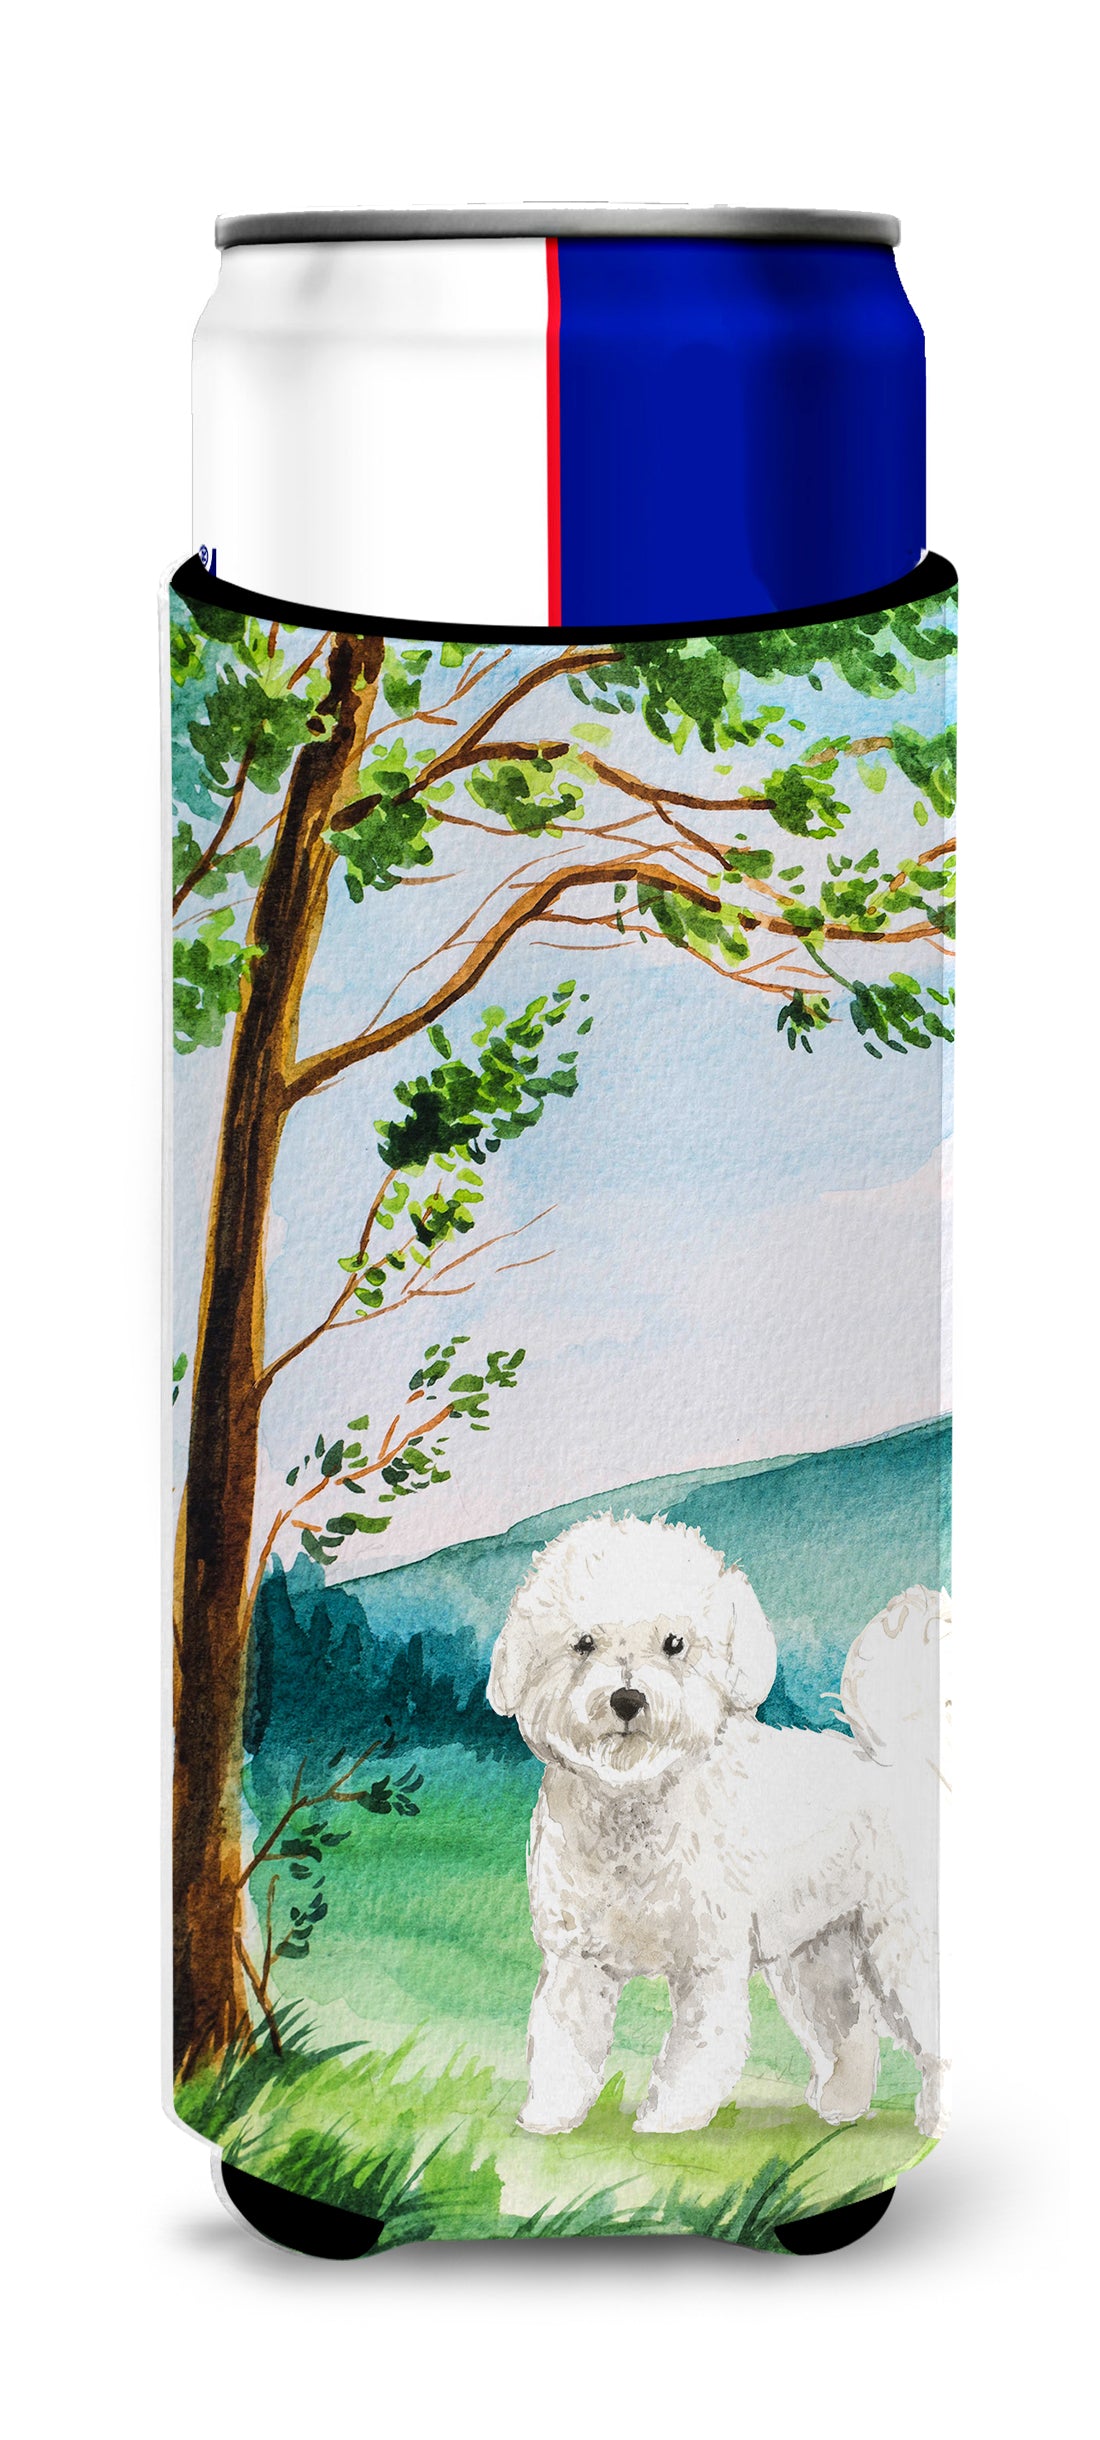 Under the Tree Bichon Frise  Ultra Hugger for slim cans CK2582MUK